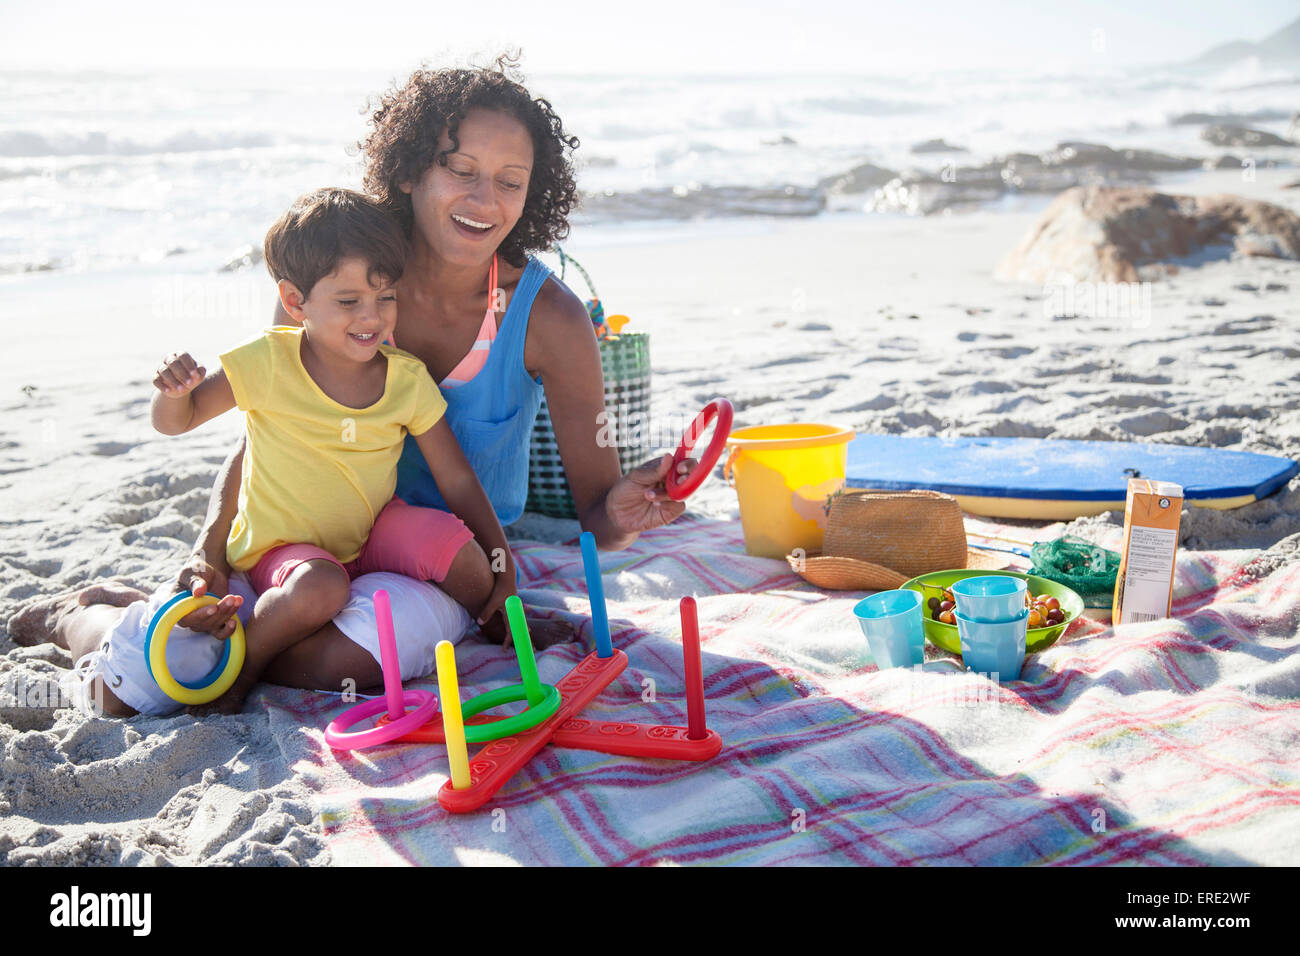 Mixed race mother and daughter playing at beach Stock Photo